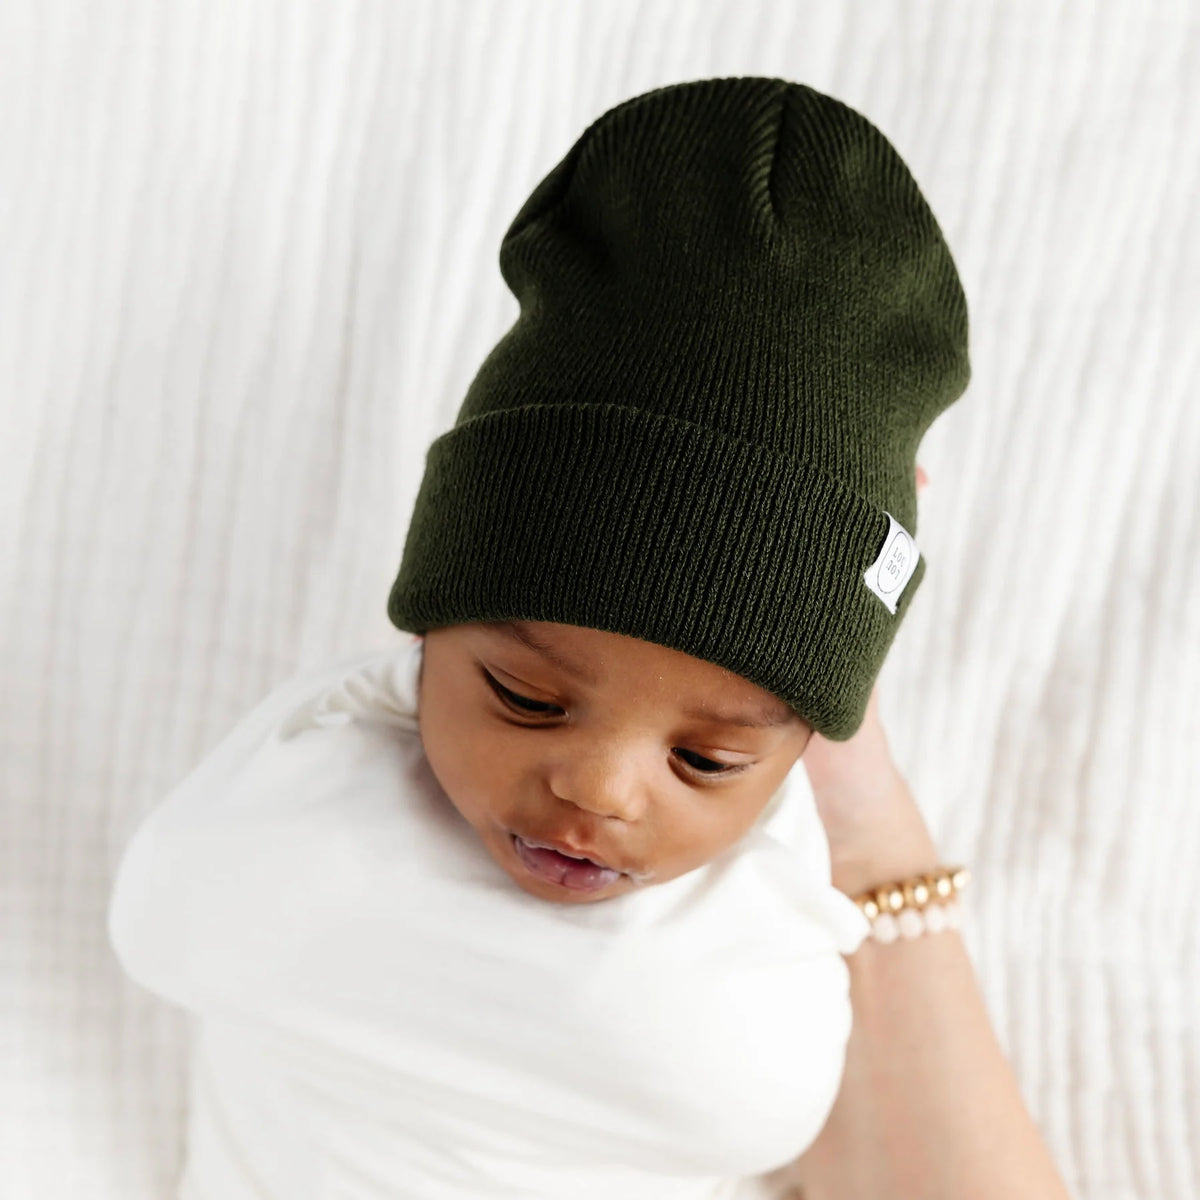 Beanie - Olive Green - Child/Adult